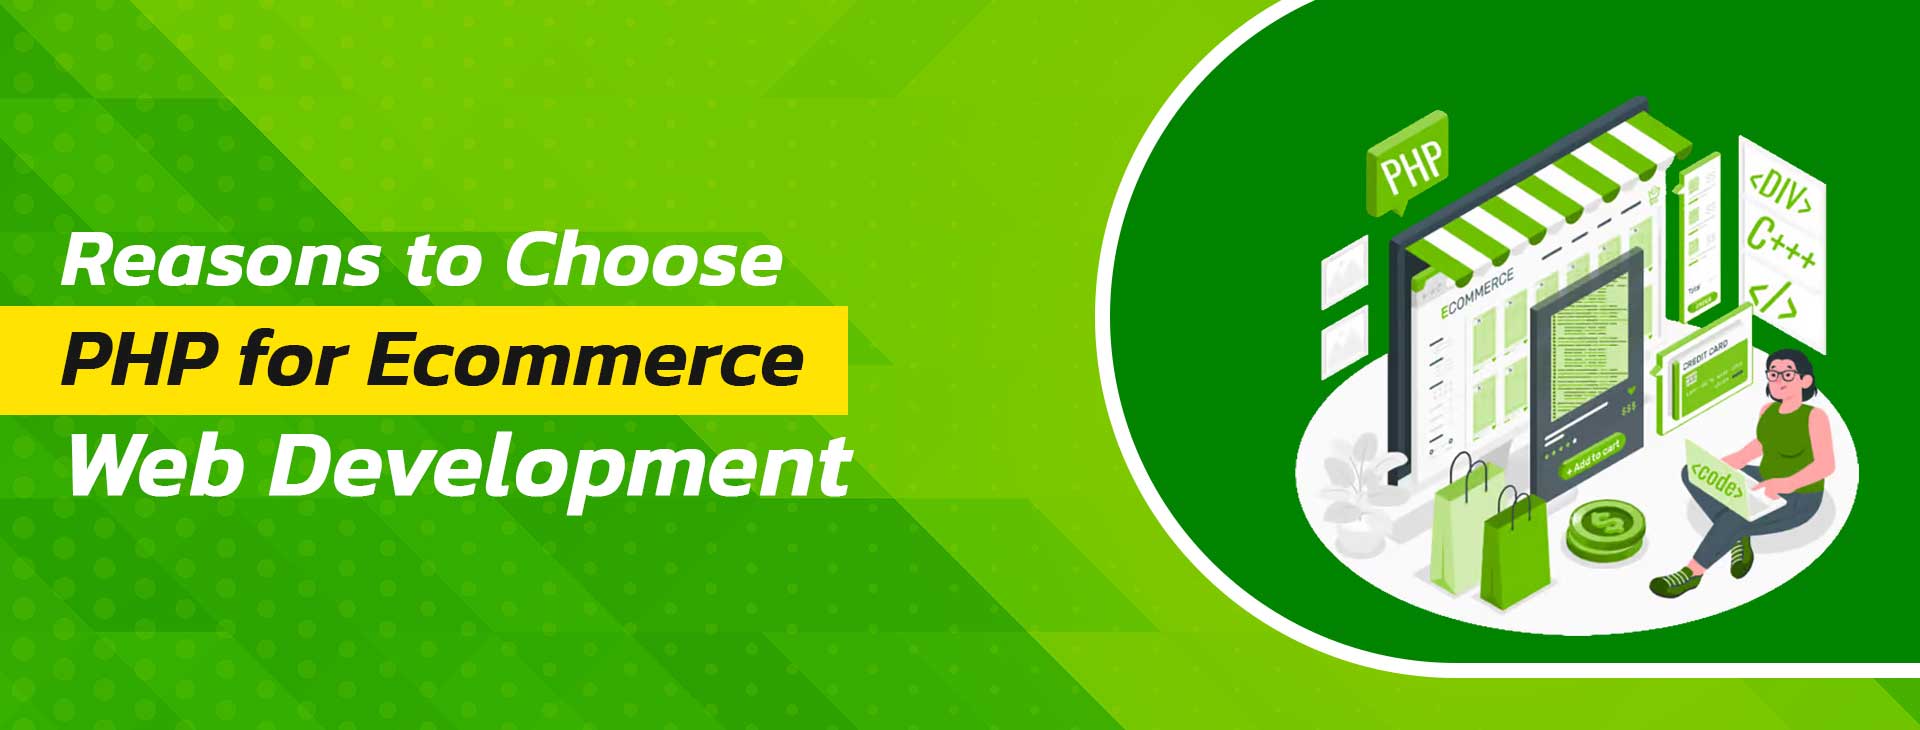 Reasons to Choose PHP for eCommerce Web Development